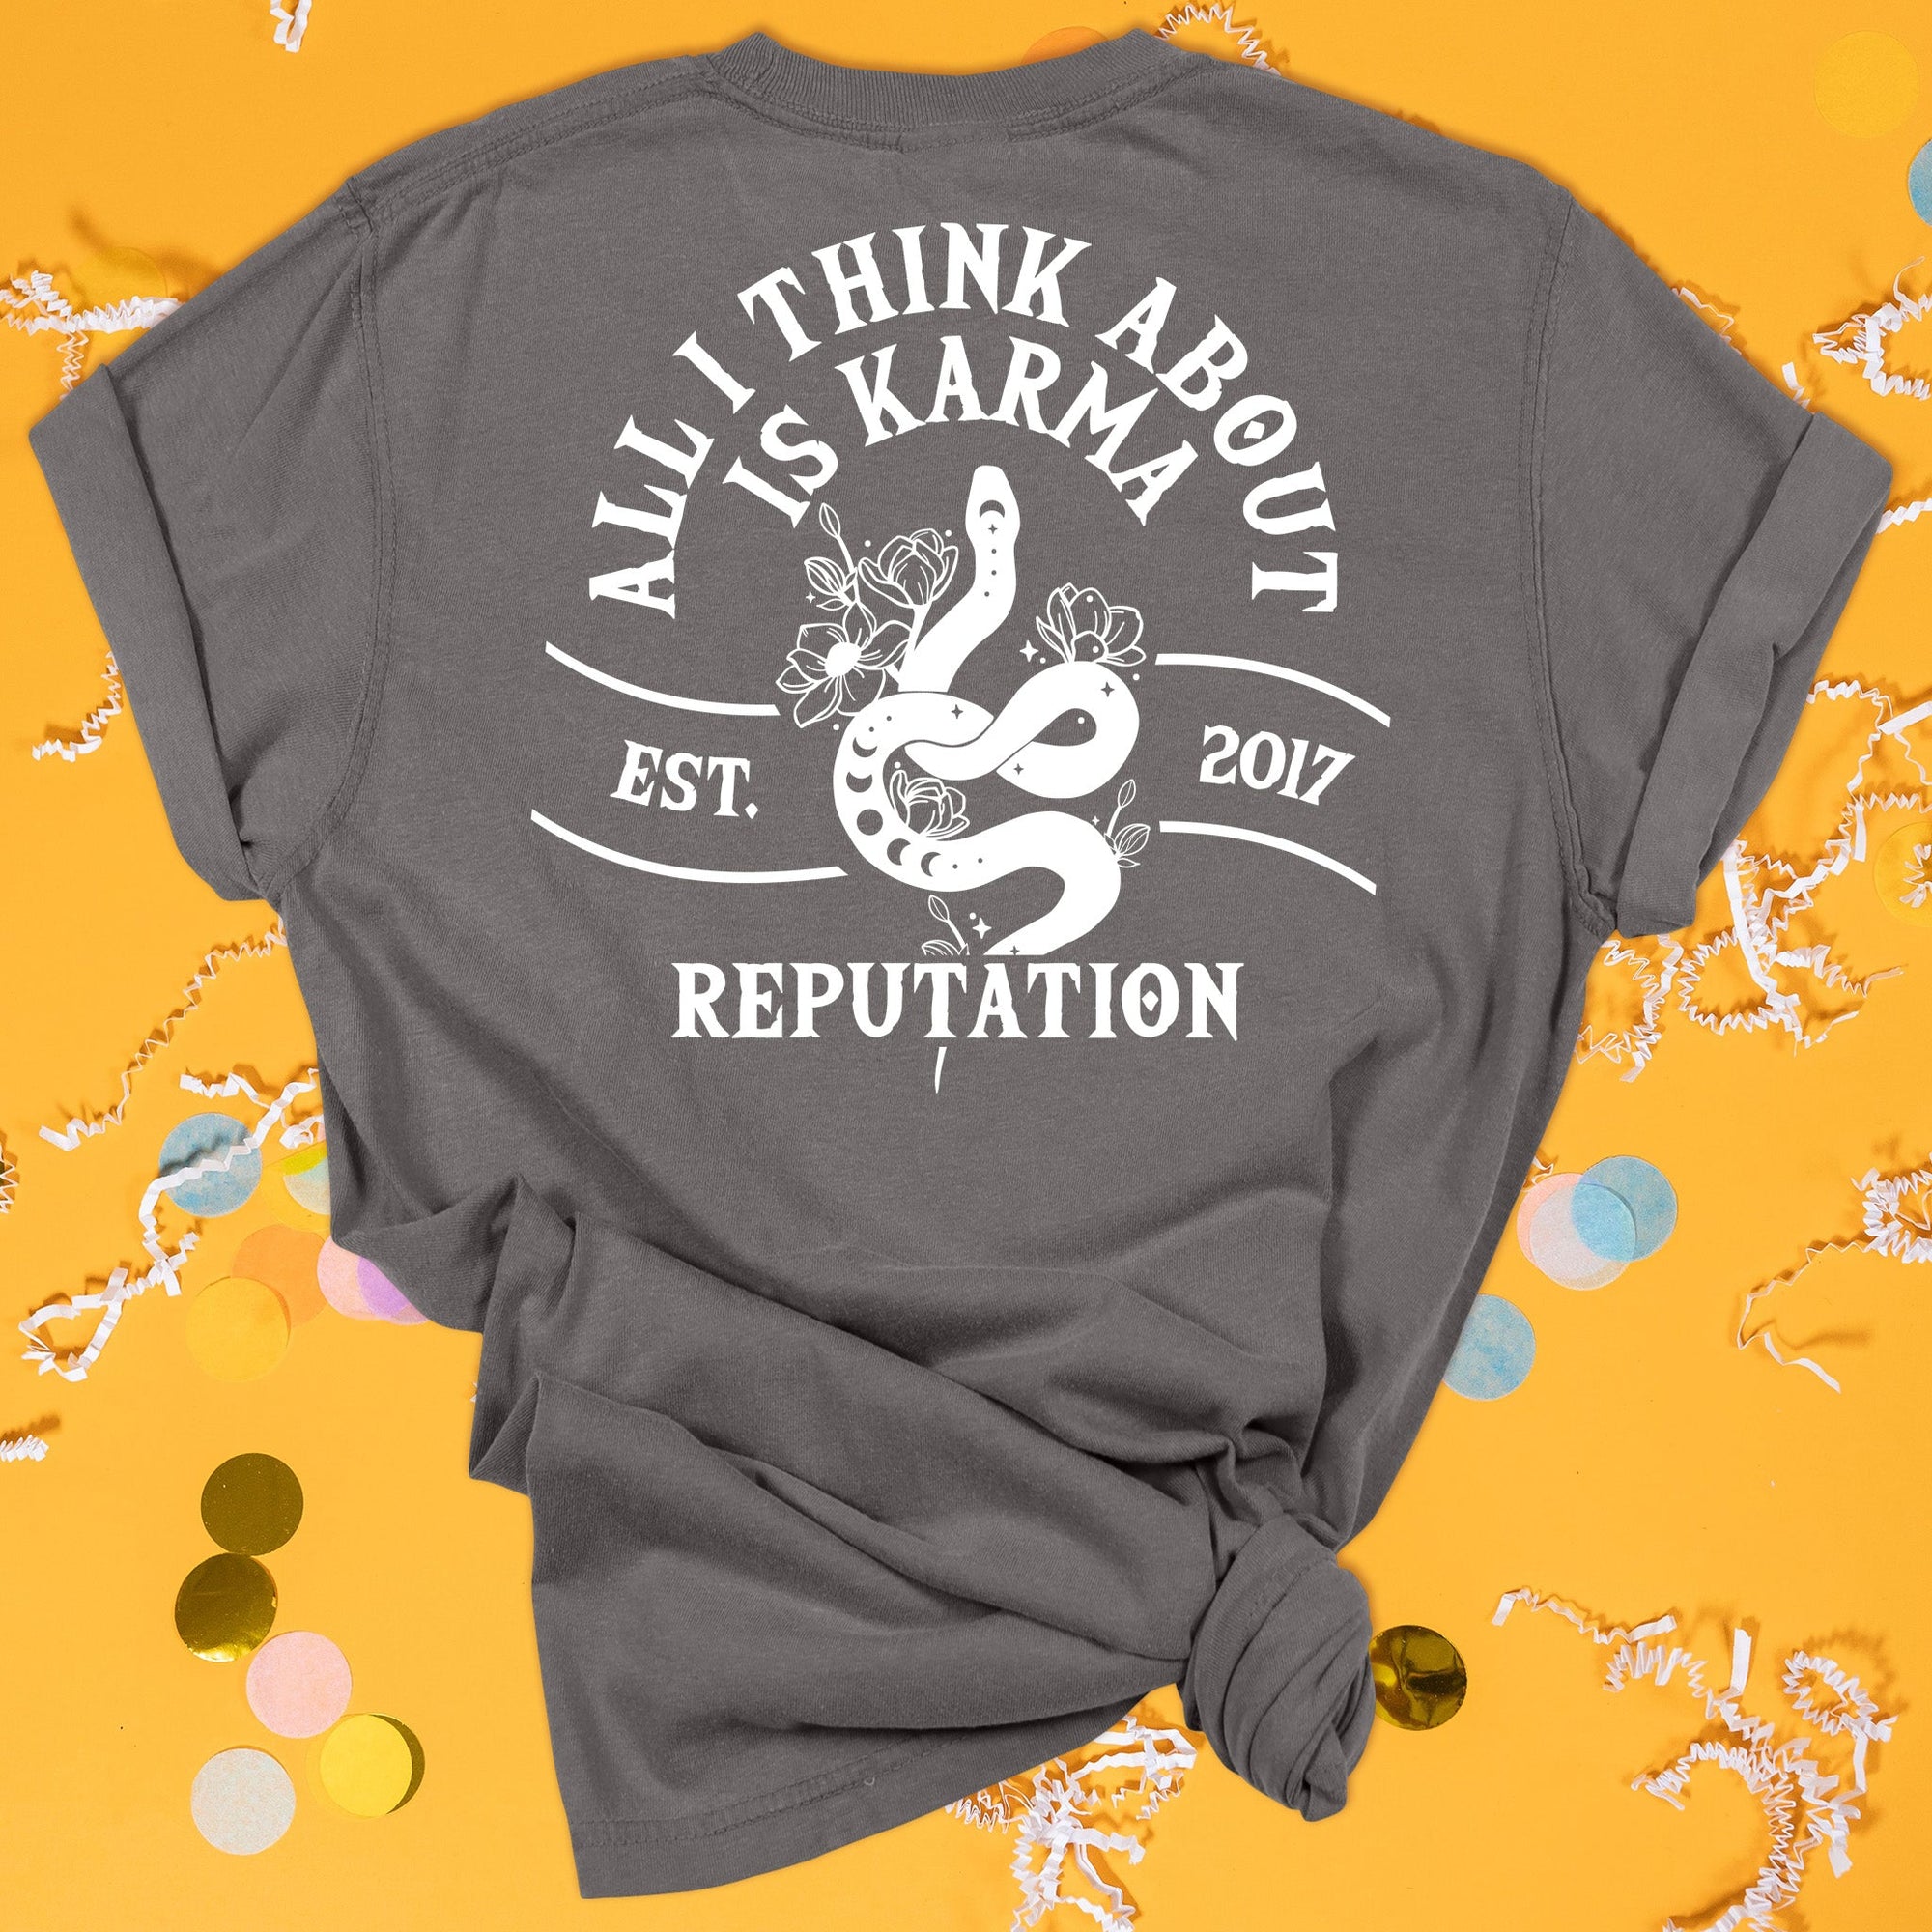 On a sunny mustard background sits the back of a t-shirt with white crinkle and big, colorful confetti scattered around. This Taylor Swift Inspired Reputation tee is dark grey with lettering and illustration. There is an illustration of a snake with flowers and it says "ALL I THINK ABOUT IS KARMA, EST. 2017, REPUTATION" in all caps.